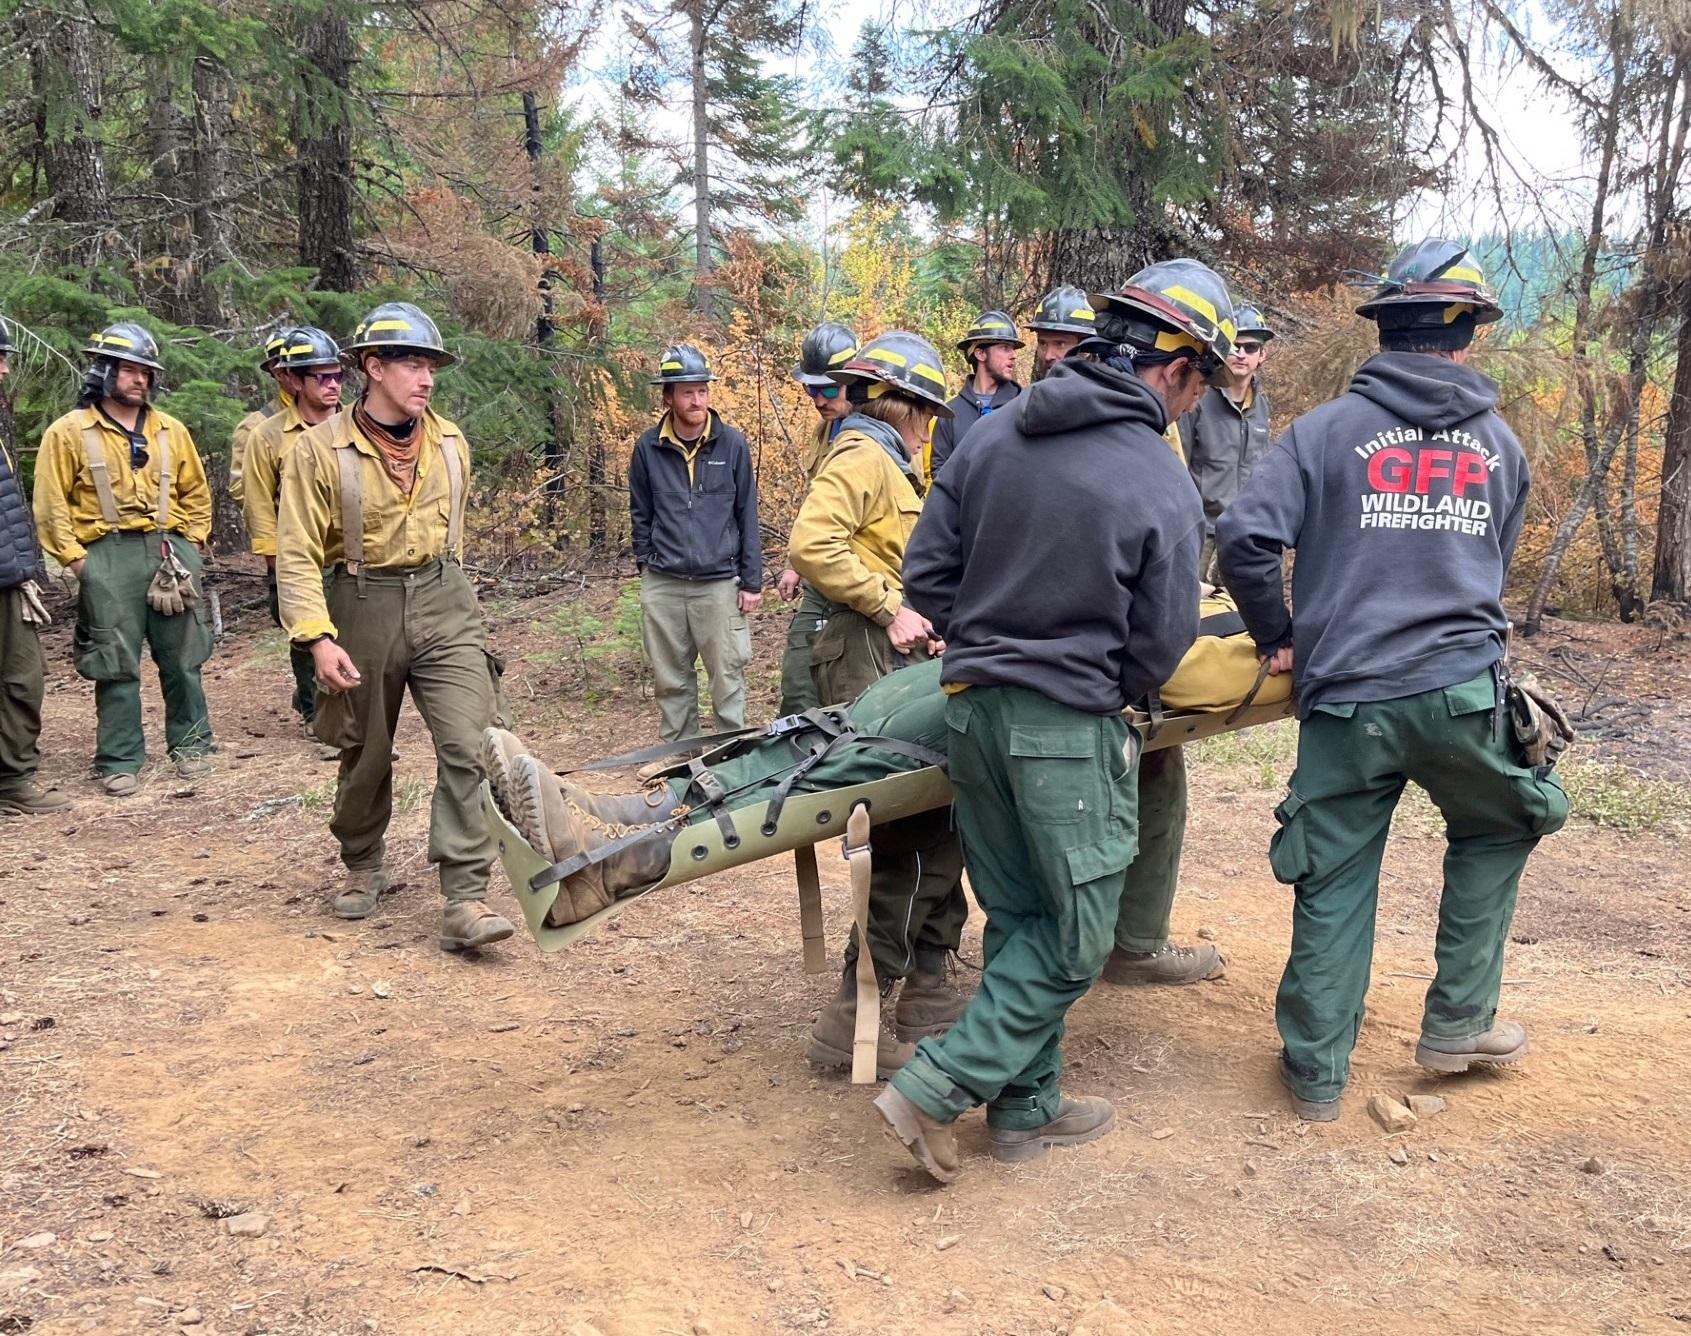 Four firefighters carry an individual on a backcountry stretcher while about a dozen other firefighters observe